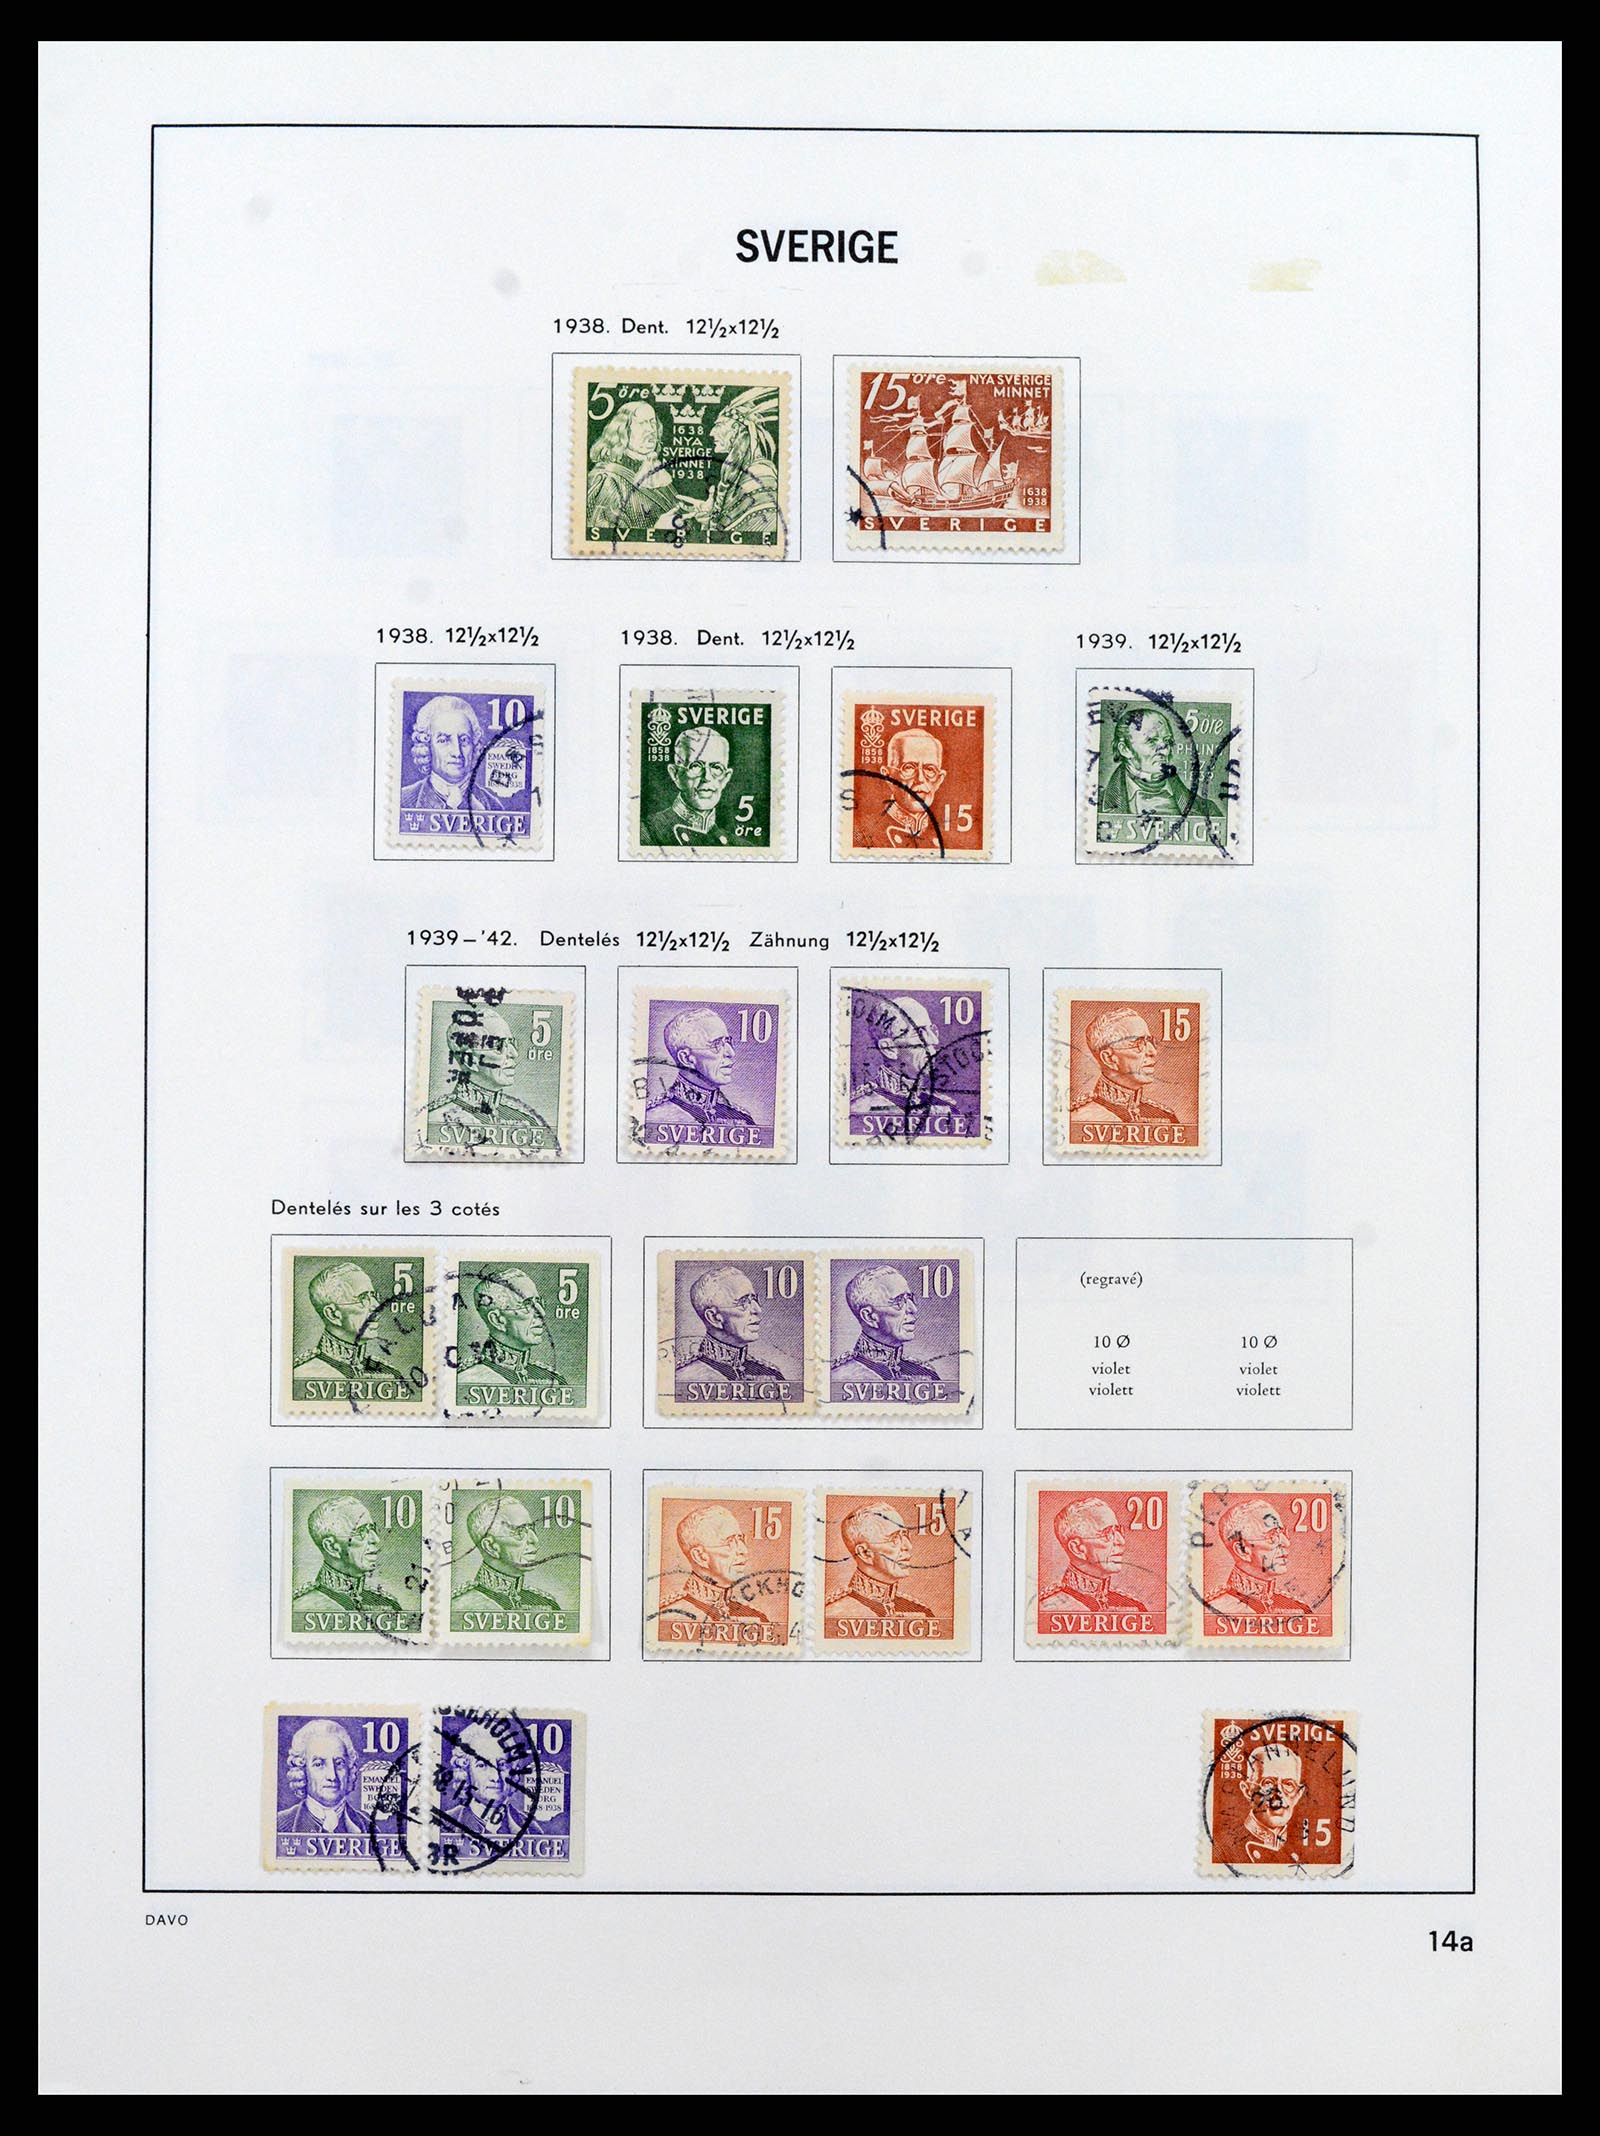 37431 017 - Stamp collection 37431 Sweden 1855-1978.